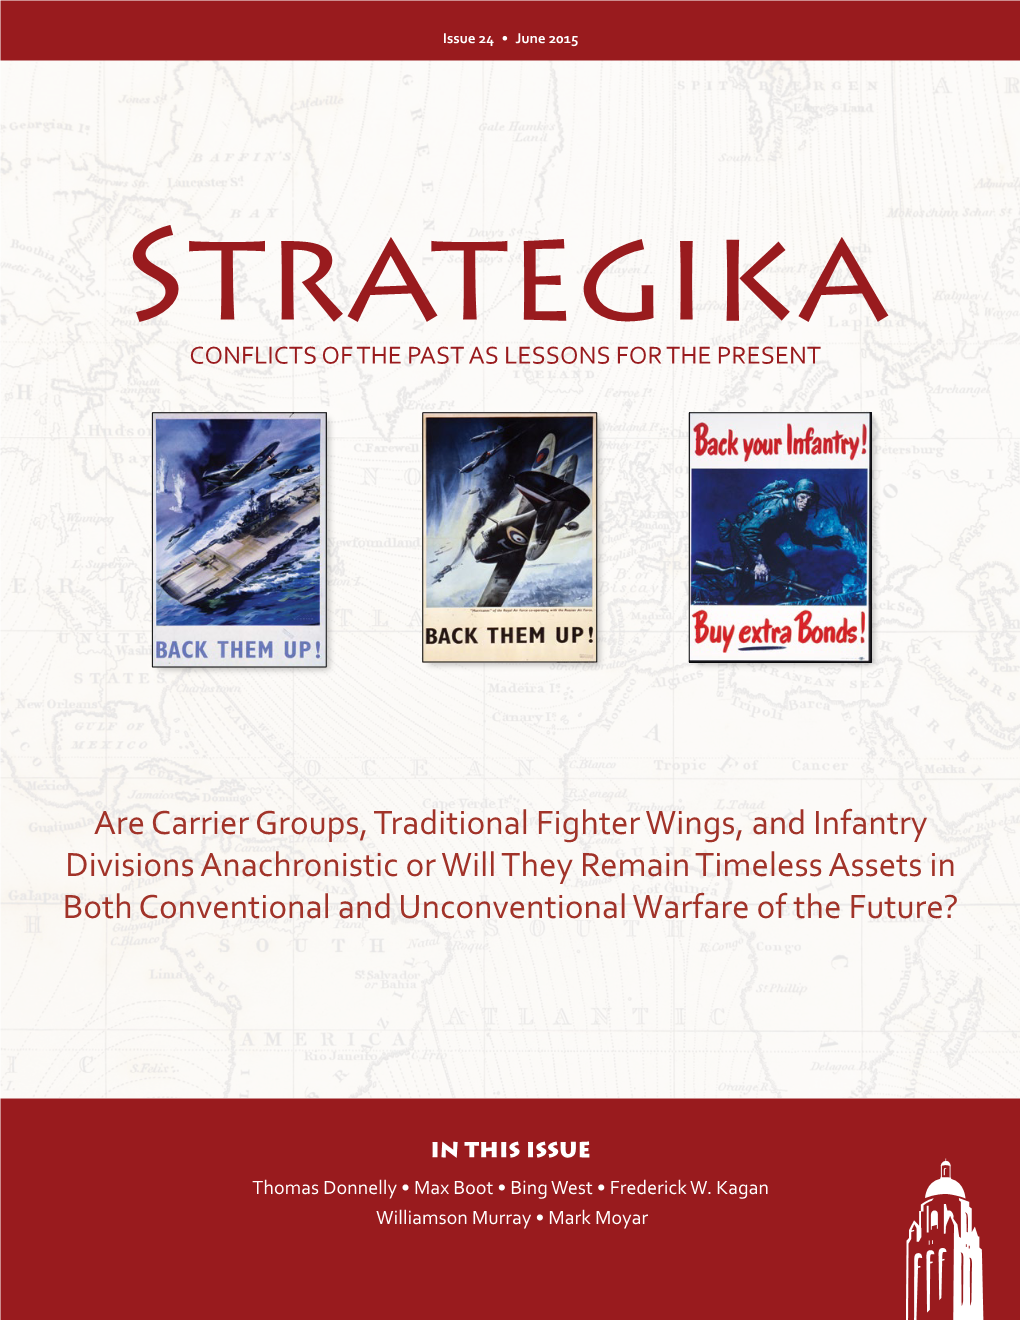 Are Carrier Groups, Traditional Fighter Wings, and Infantry Divisions Anachronistic Or Will They Remain Timeless Assets in Both